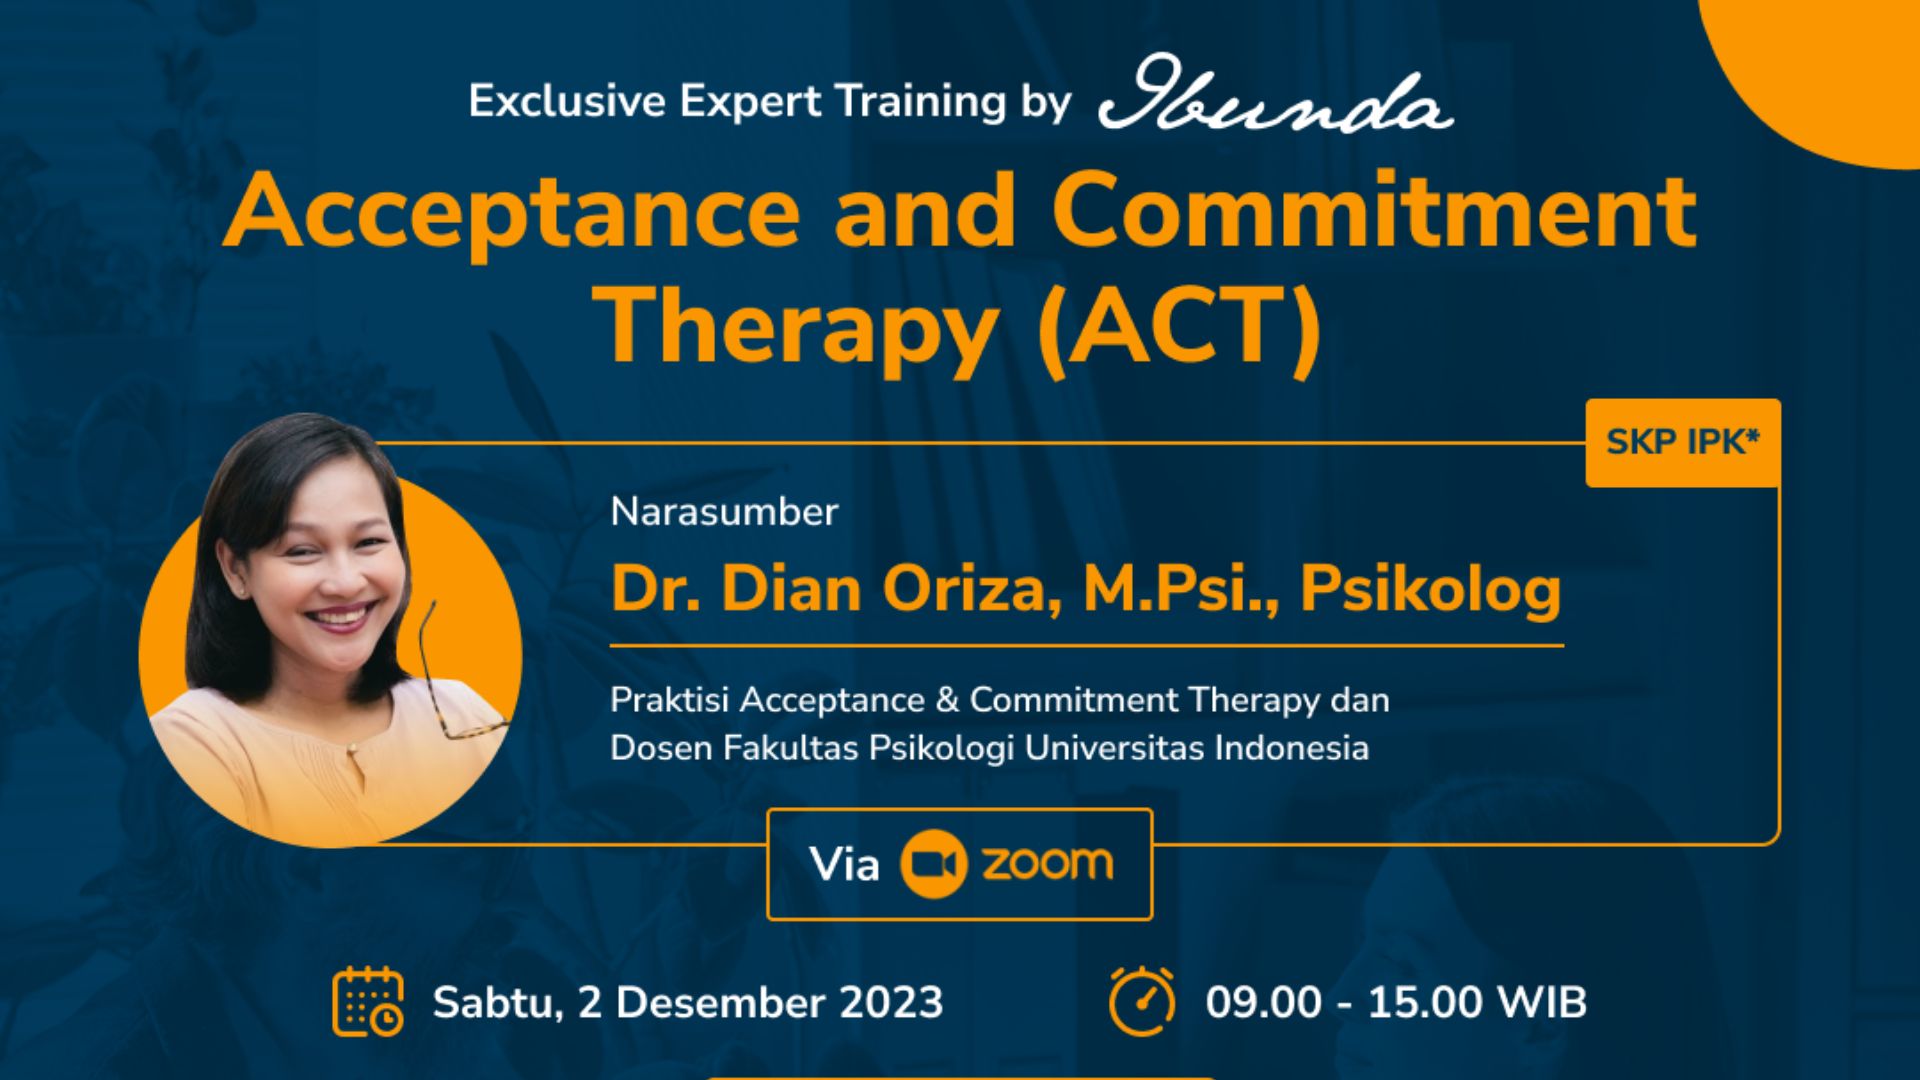 Exclusive Expert Training: Acceptance and Commitment Therapy (ACT) Batch 2